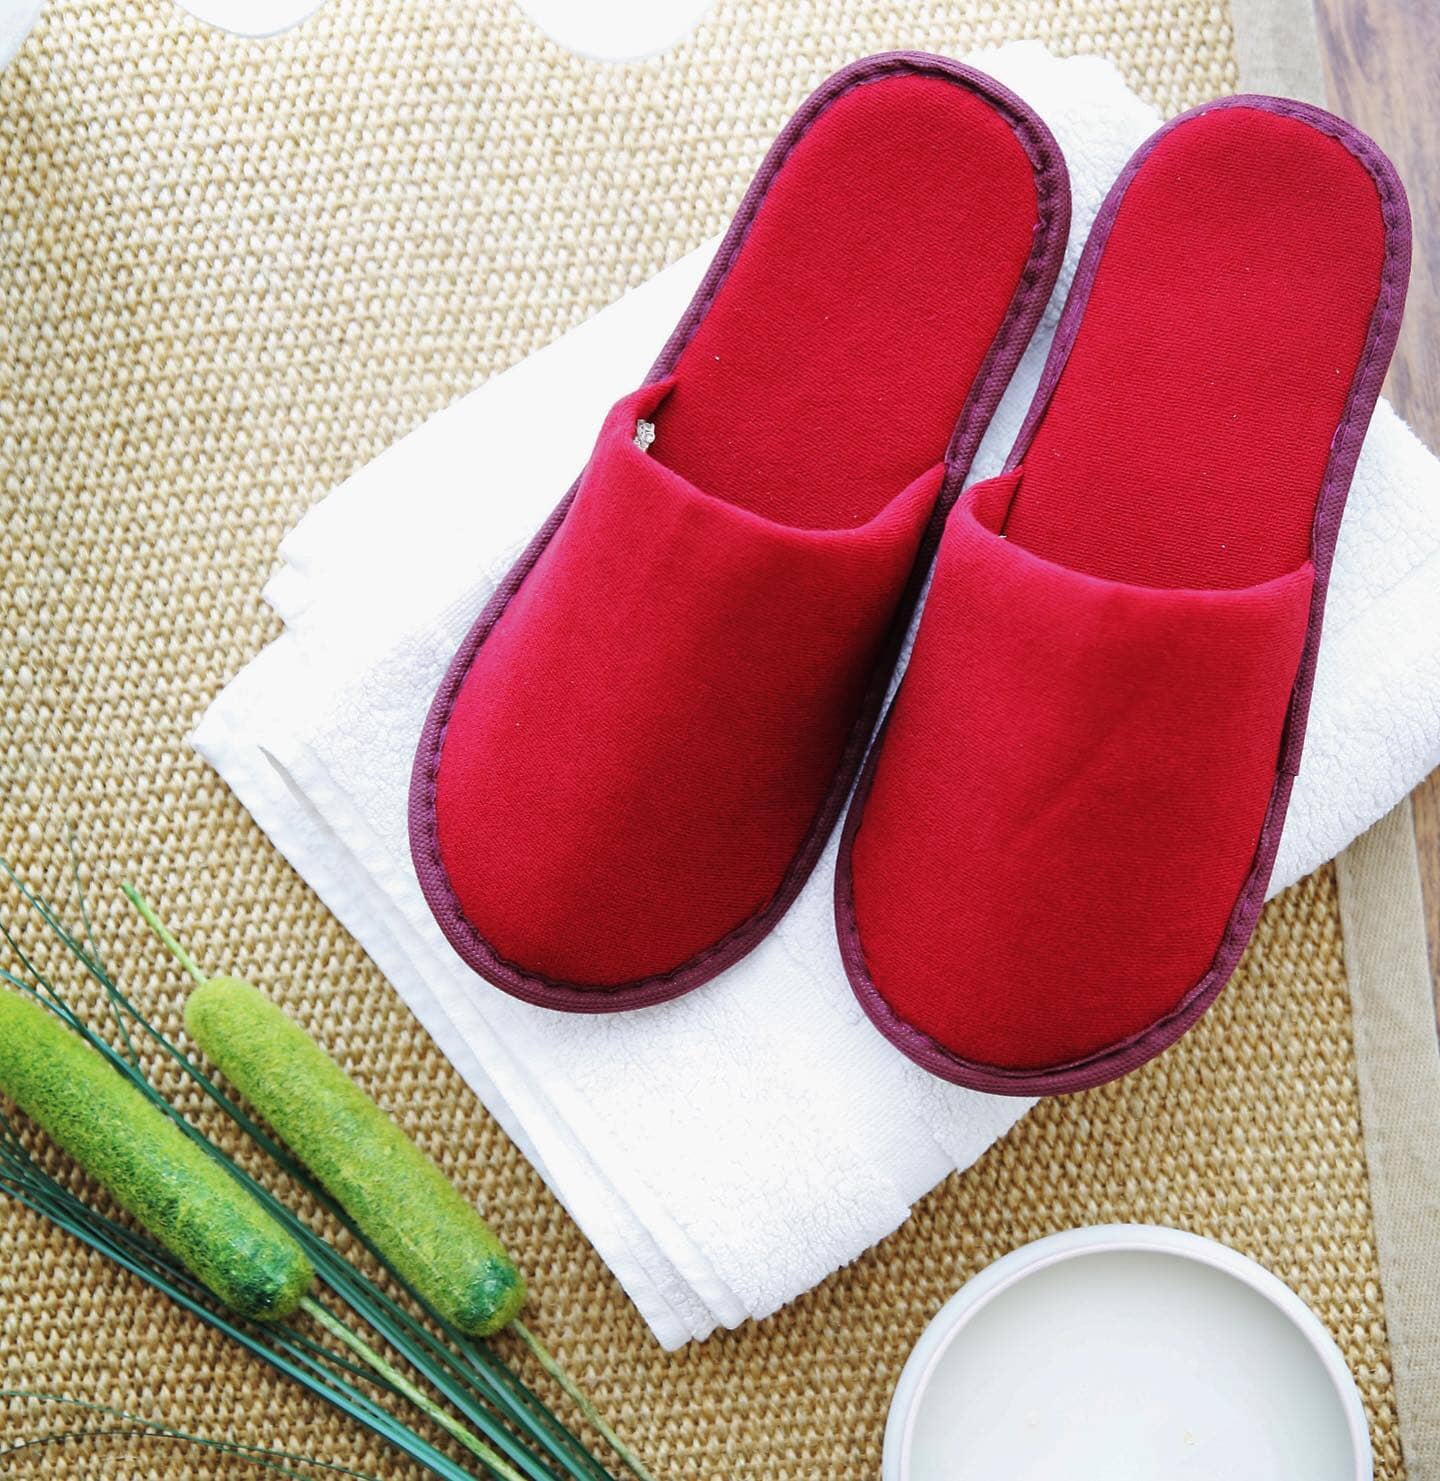 Chochili 1000 Pairs Fabric Packed Terry Cotton Disposable Hotel Slippers for Airbnb Spa Wedding Guests Adult Men Women Size 10-11, White supplyity 